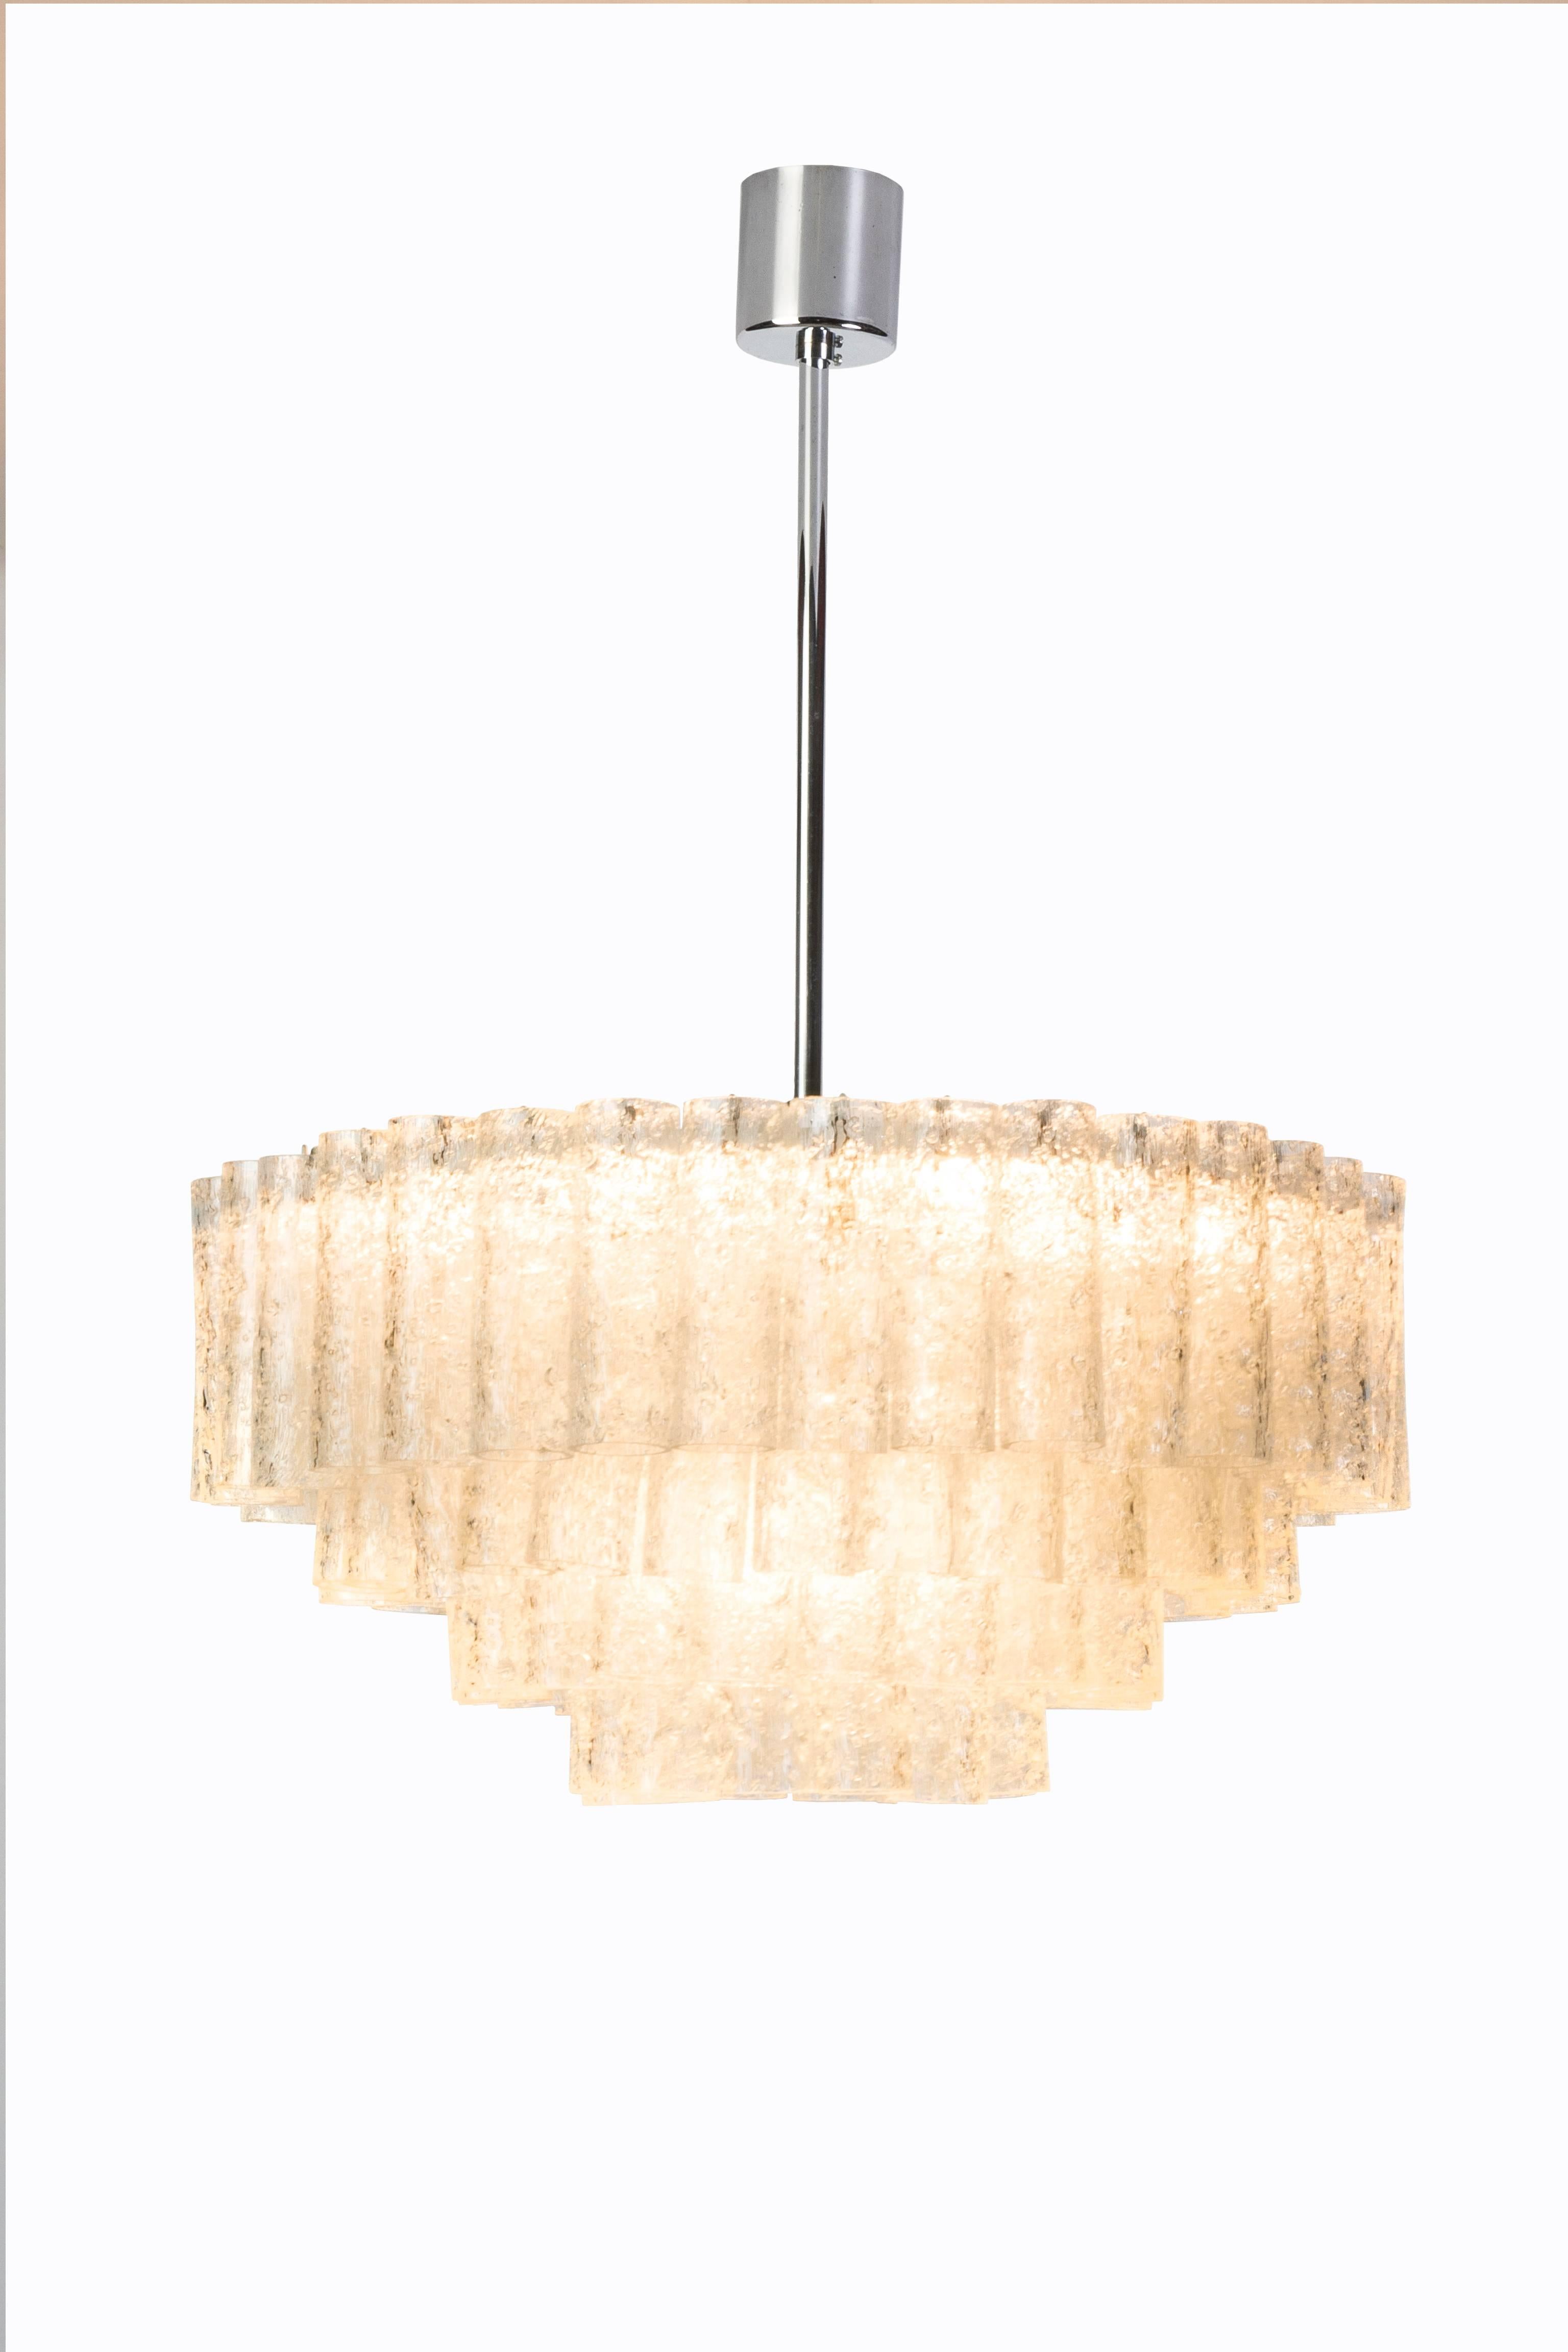 This exceptional German Art Deco chandelier was created by Doria. It features multi-tiered texture glass tubes cascading from a chrome base giving it an icicle form design.